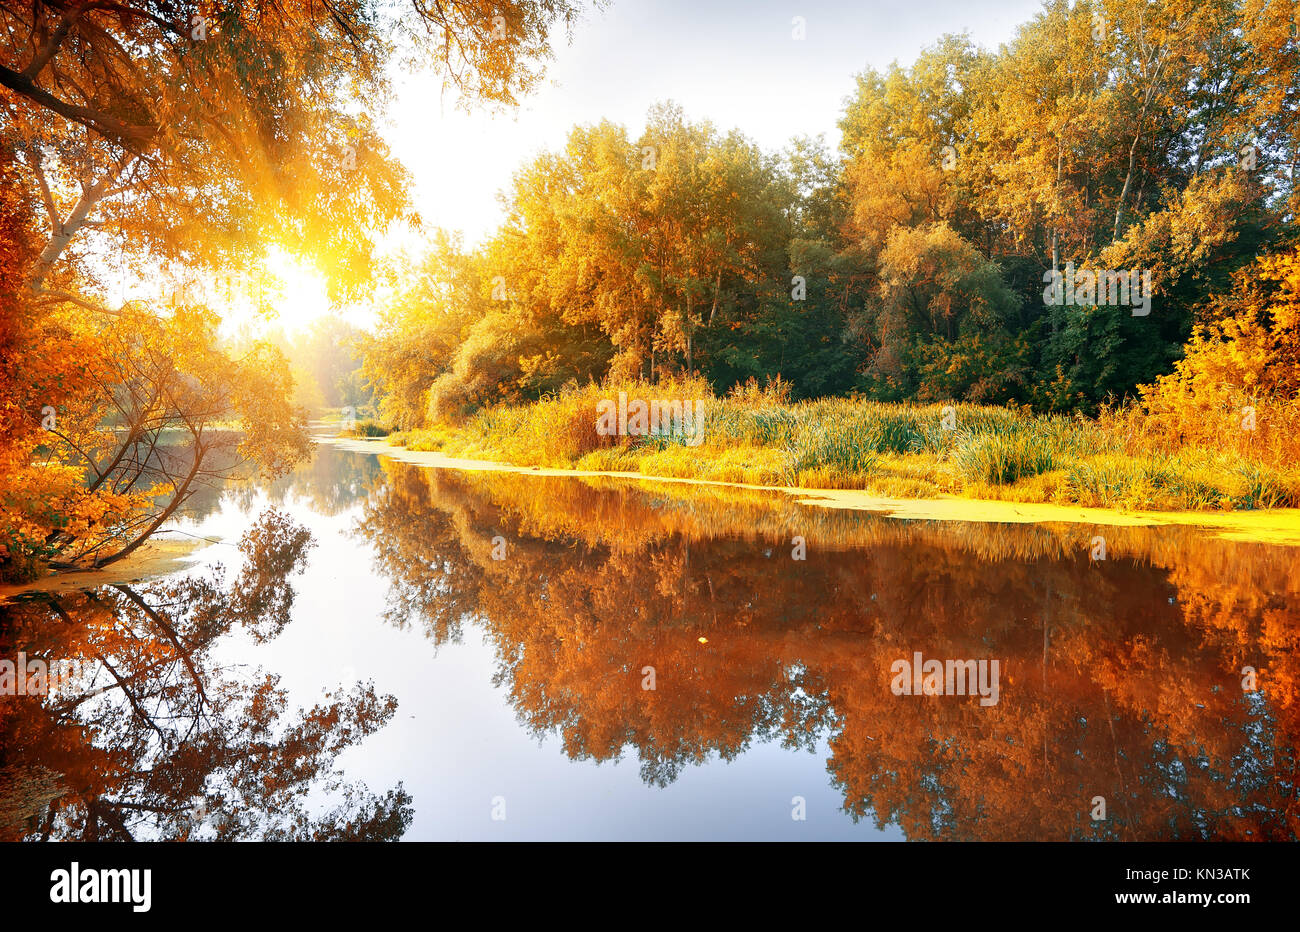 River in a delightful autumn forest at sunny day. Stock Photo